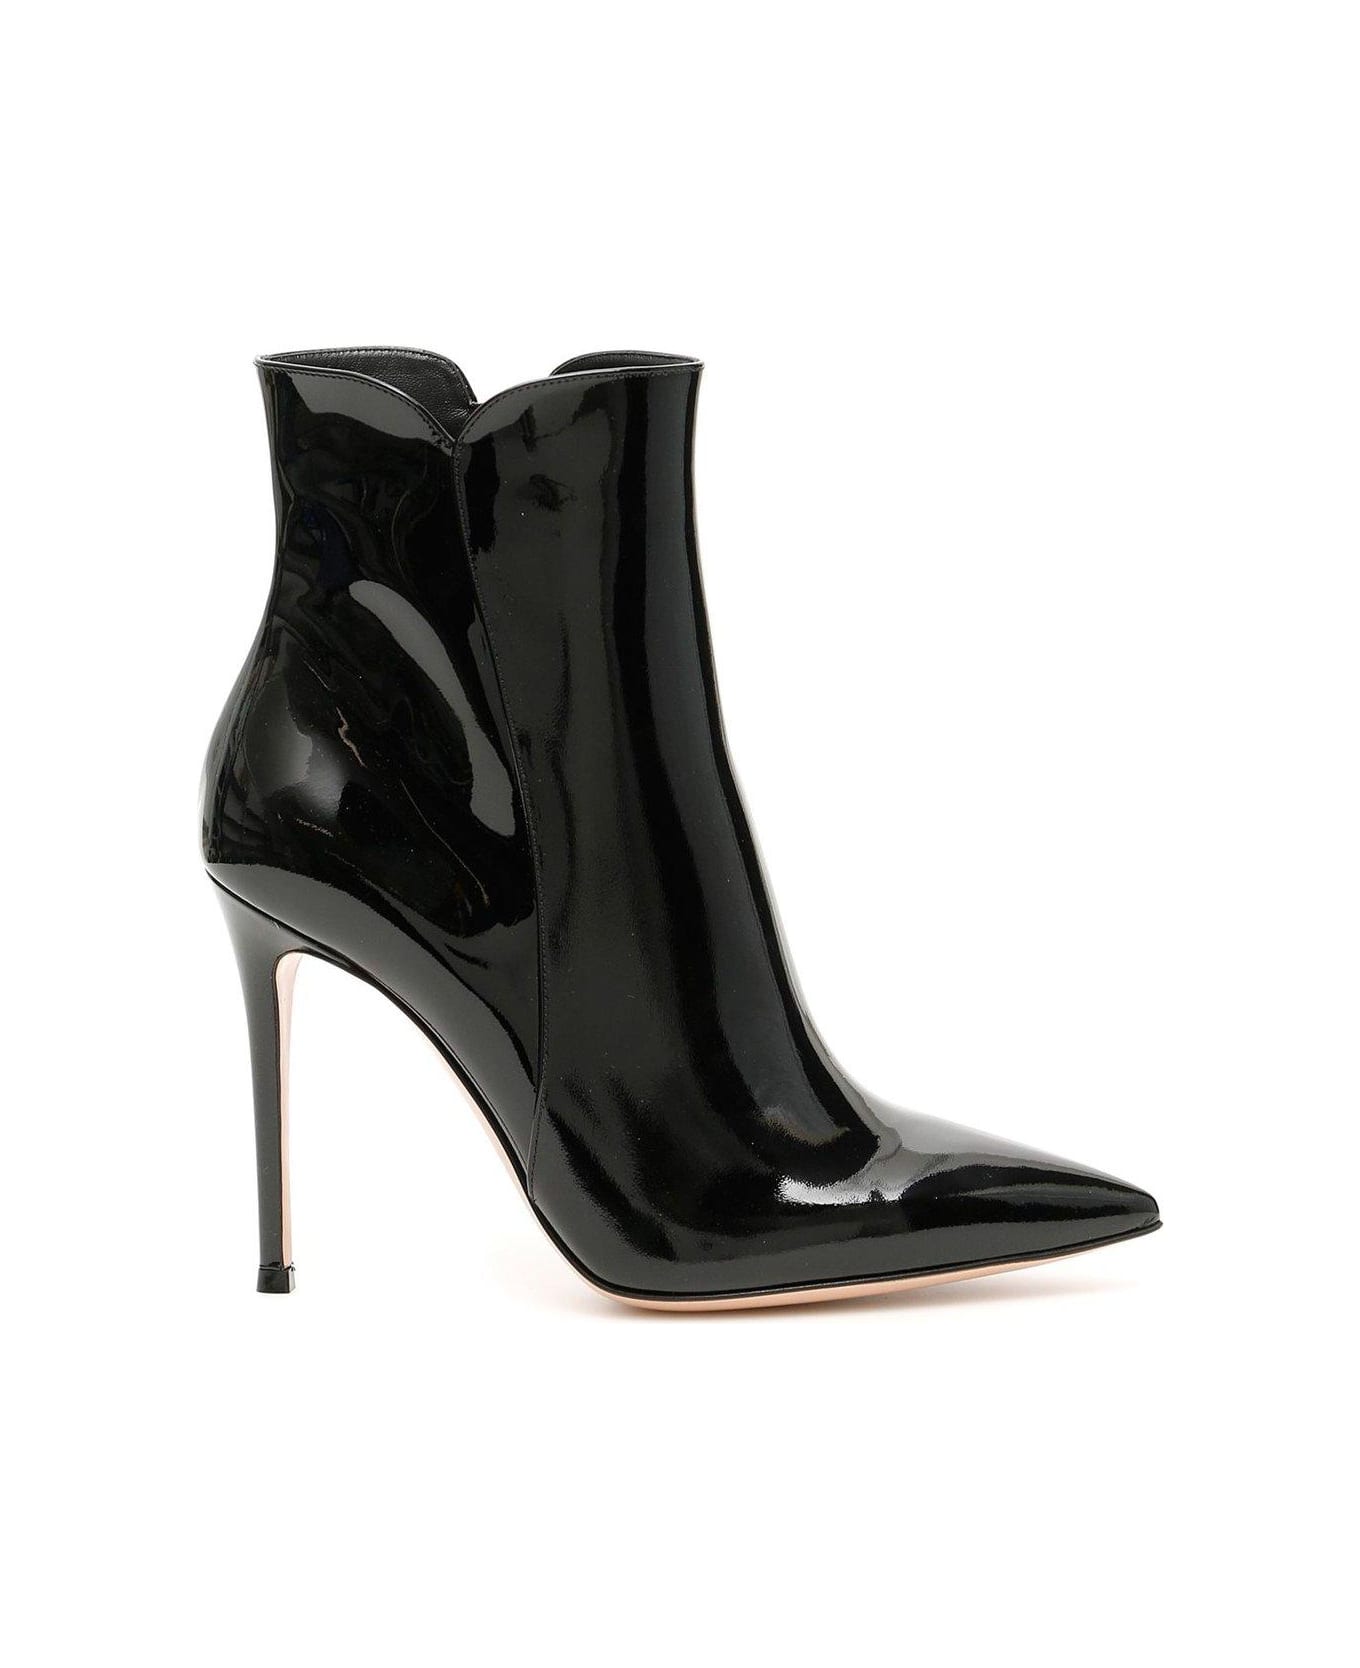 Gianvito Rossi Levy Zip-up Boots - Black ブーツ